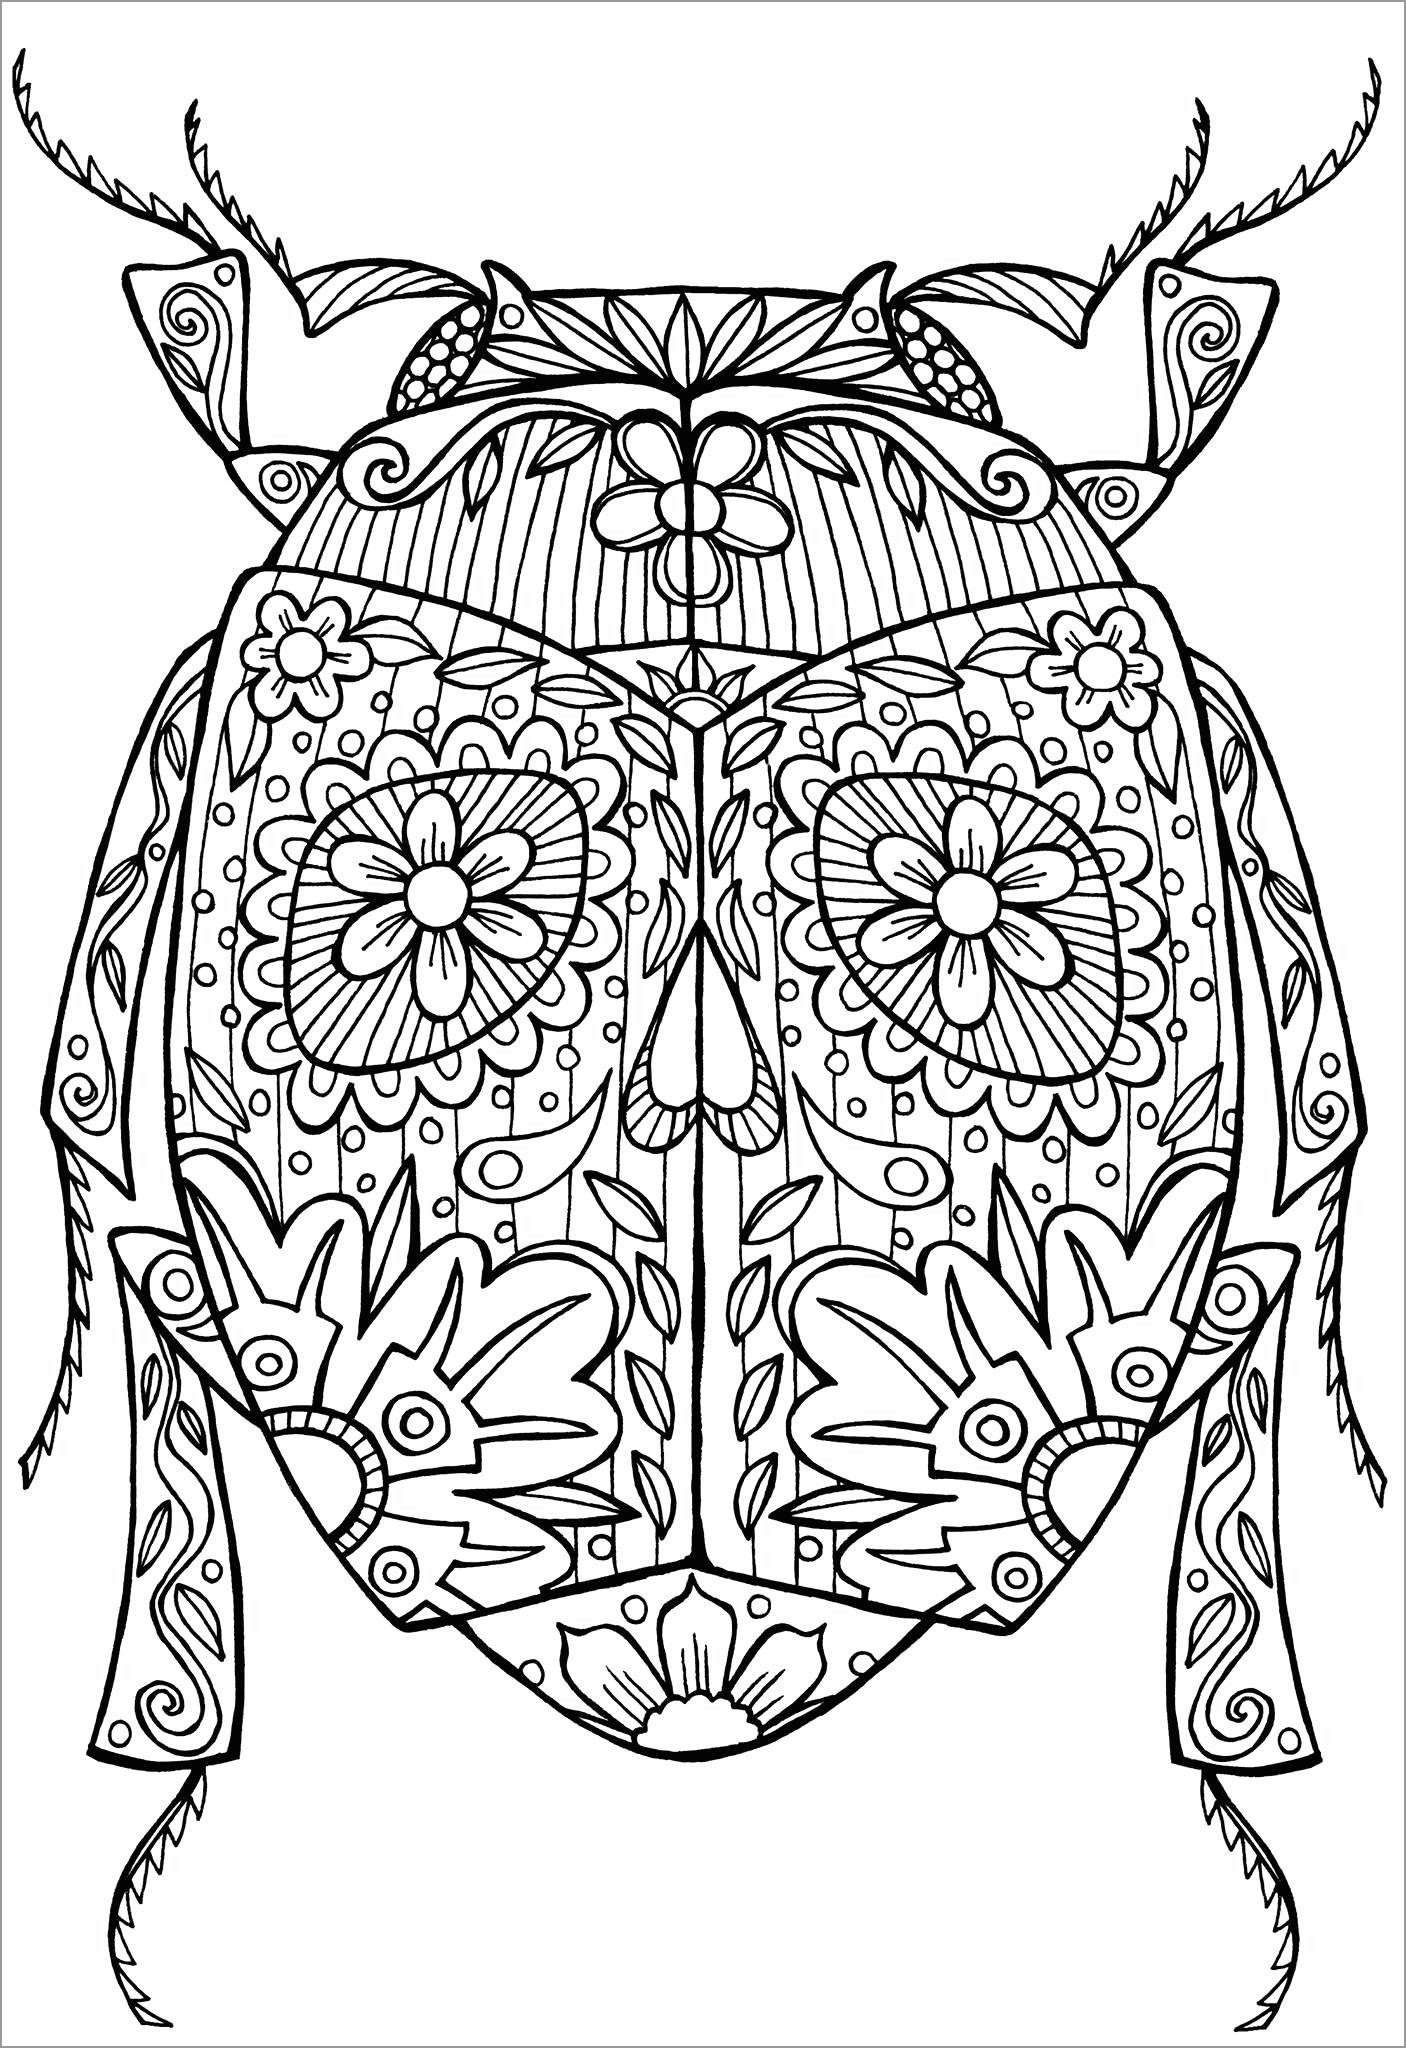 Mandala Insects Coloring Pages for Adults